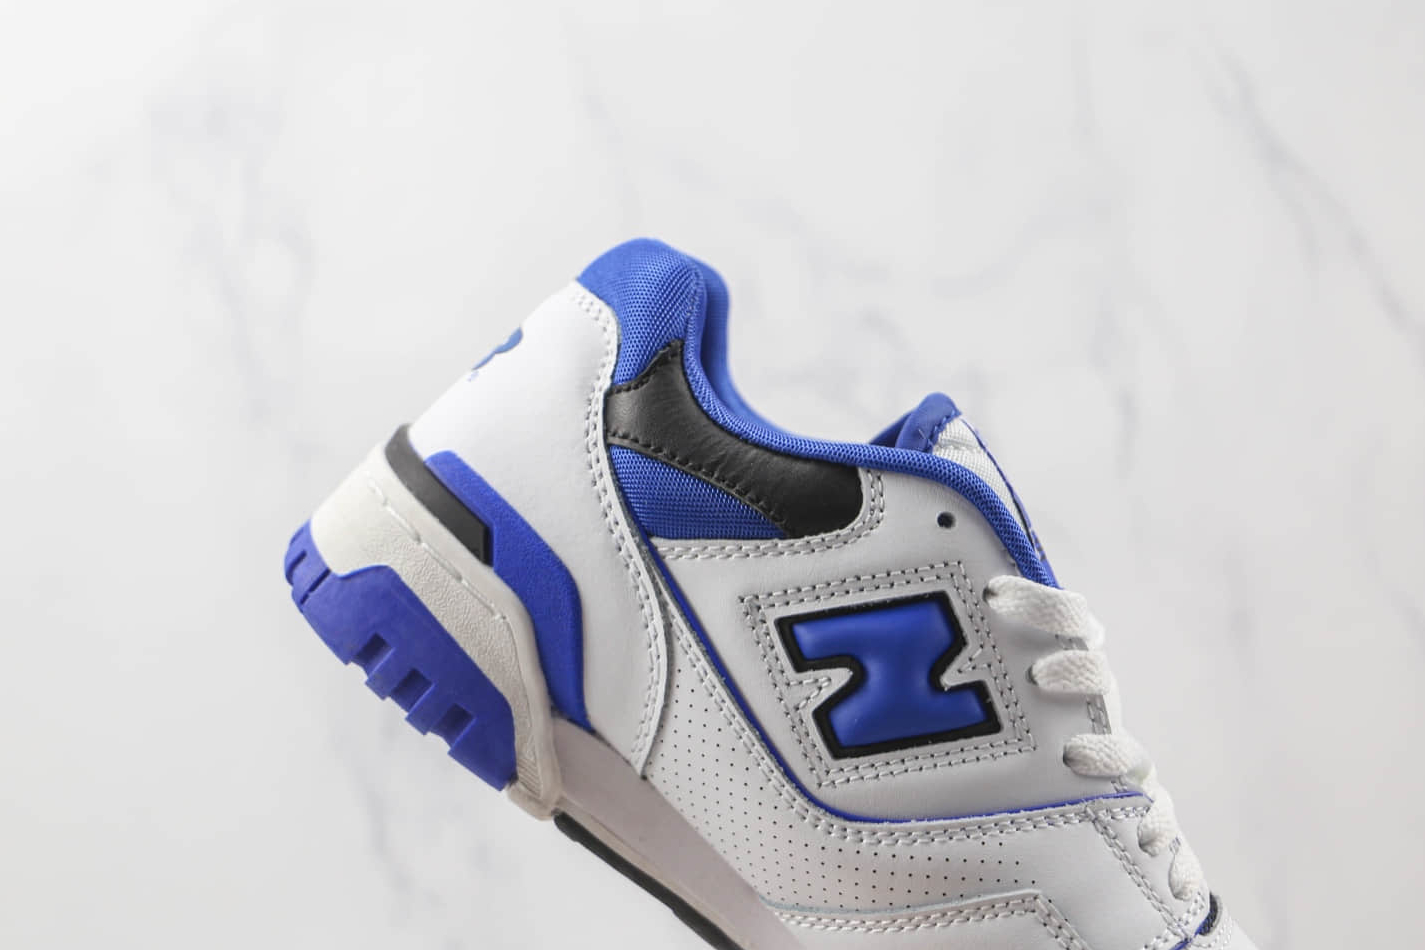 New Balance 550 White Team Royal Sneakers - Classic Style and Ultimate Comfort!